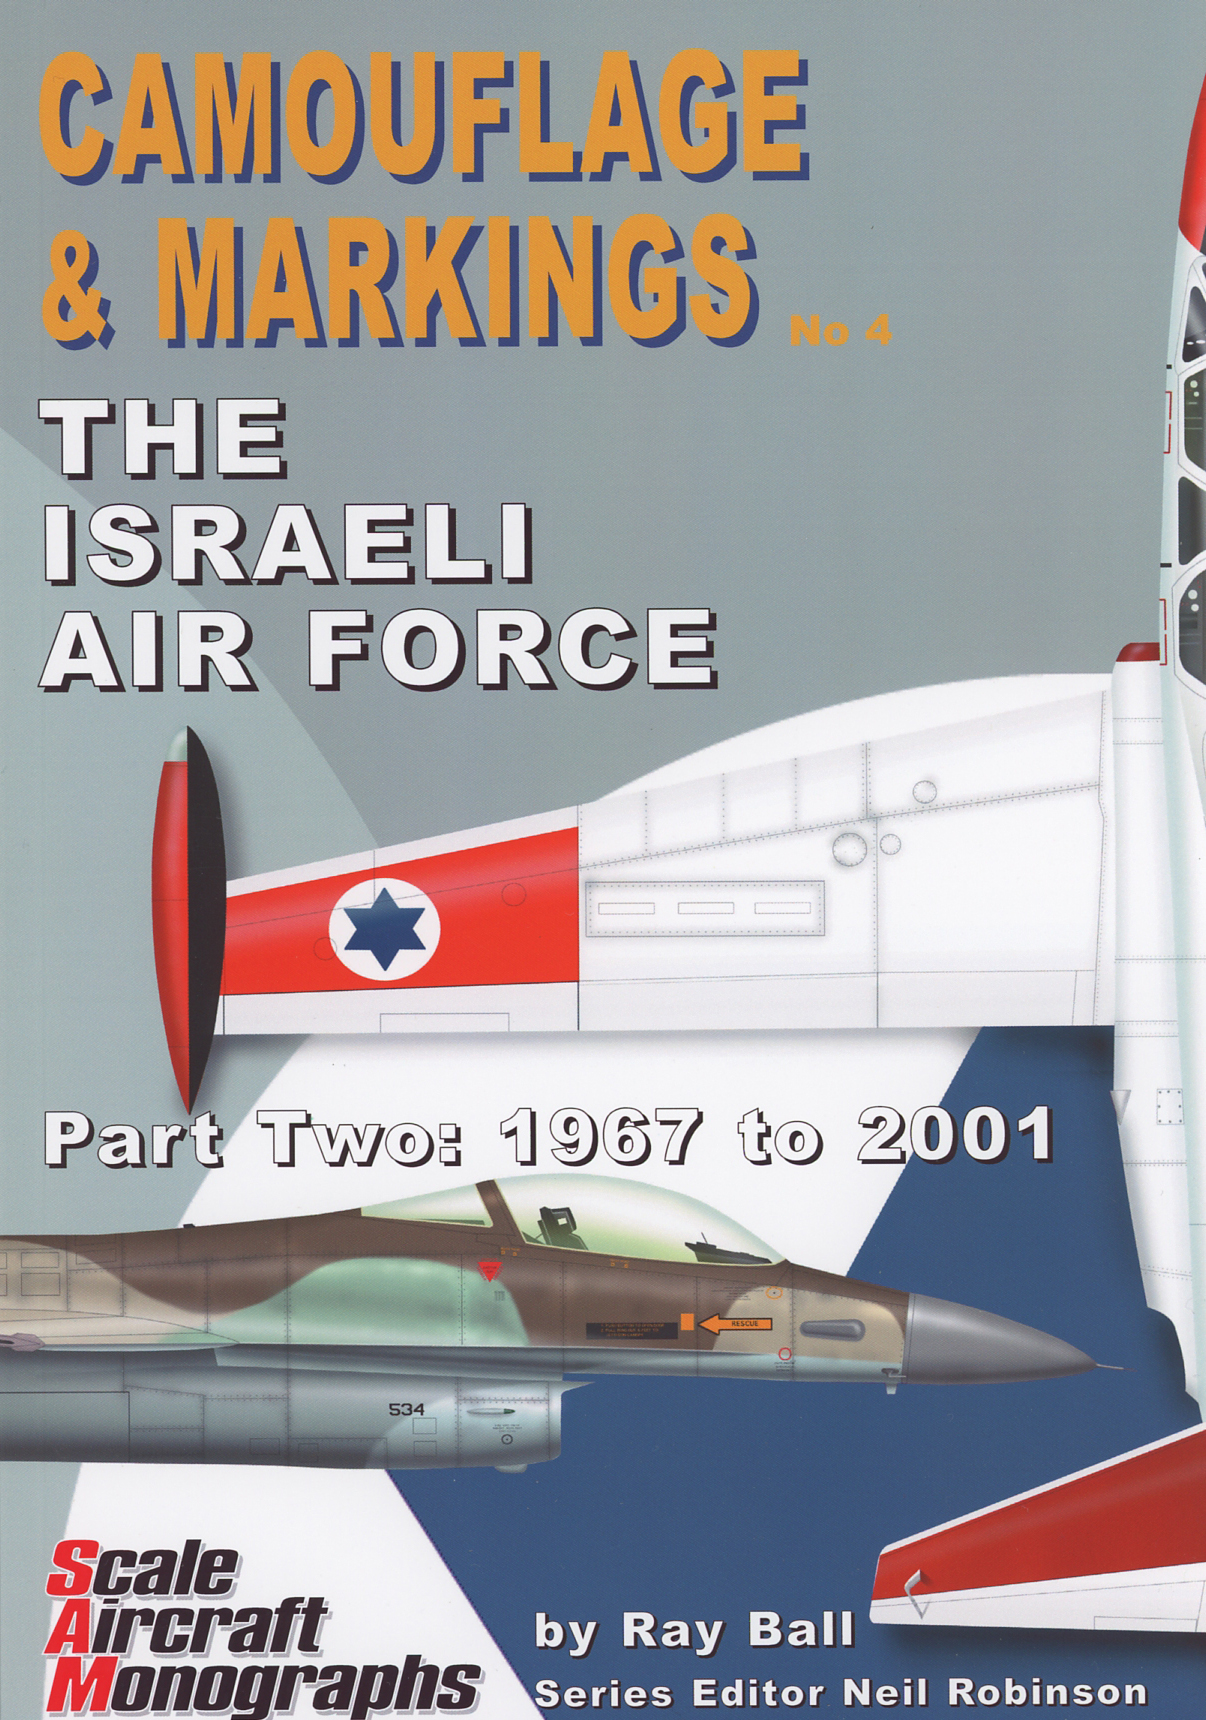 Guideline Publications Ltd Camouflage & Markings 4 The Israeli Air Force Part 2: 1967-2001 by Ray Ball 